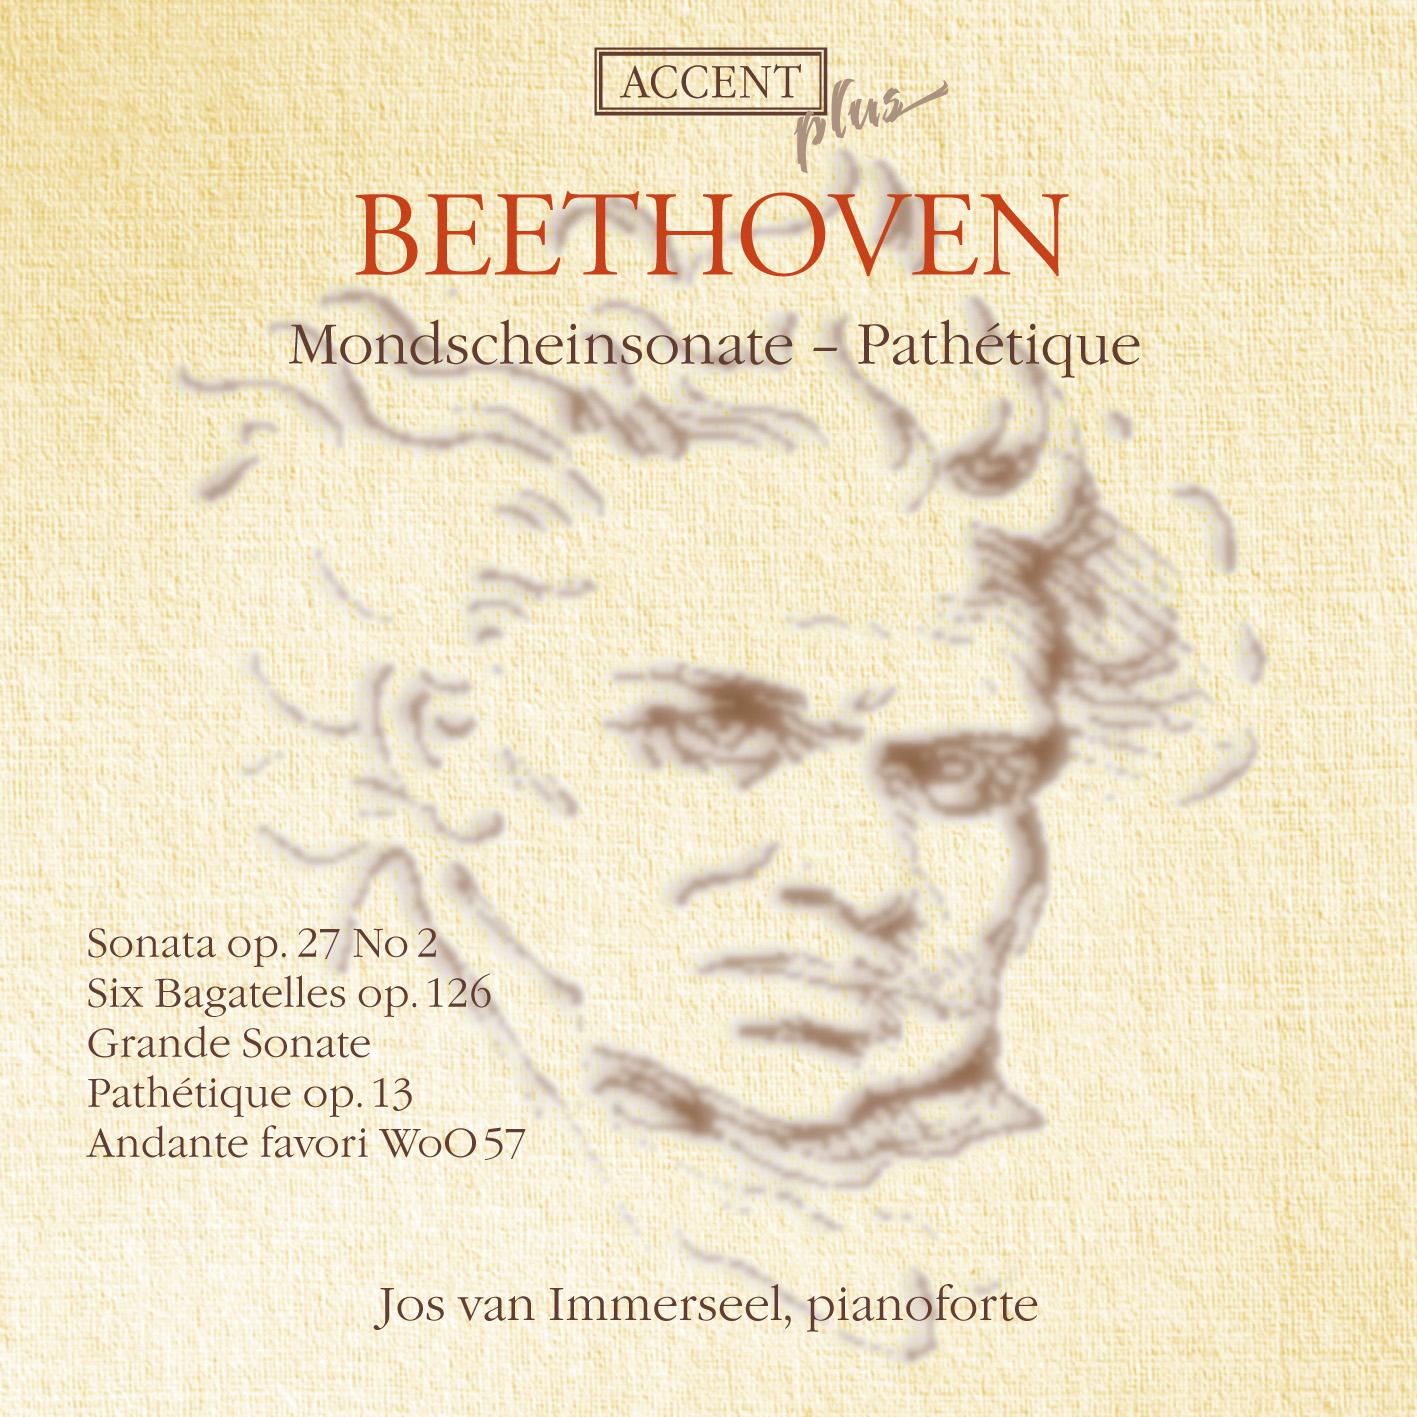 Beethoven: Pathe tique